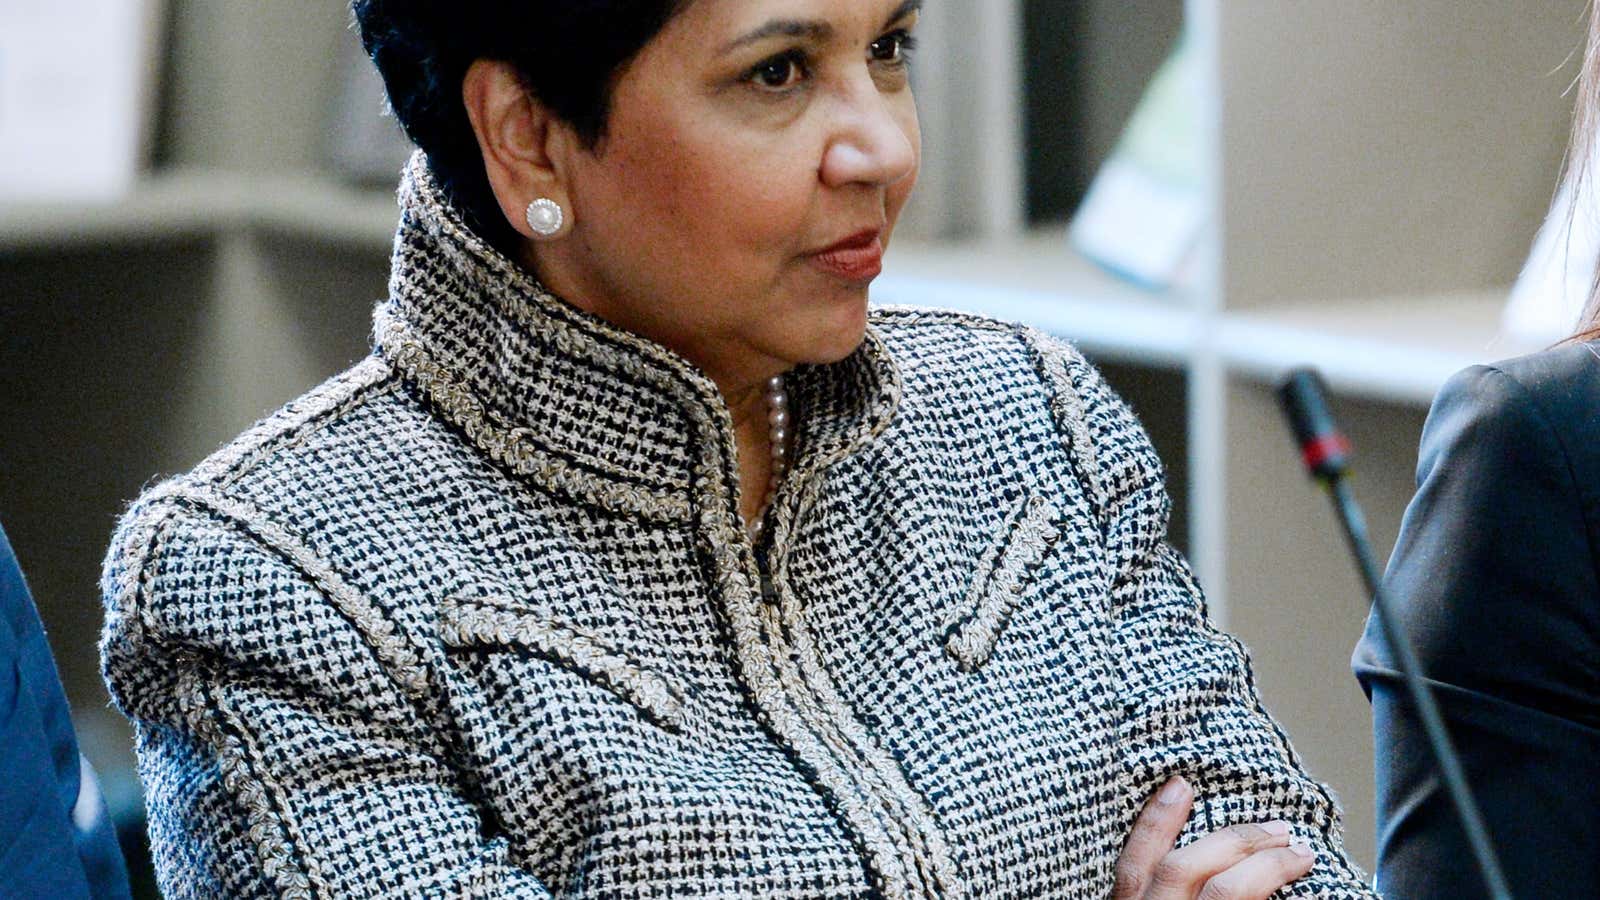 Advice to working mothers everywhere, from Indra Nooyi.